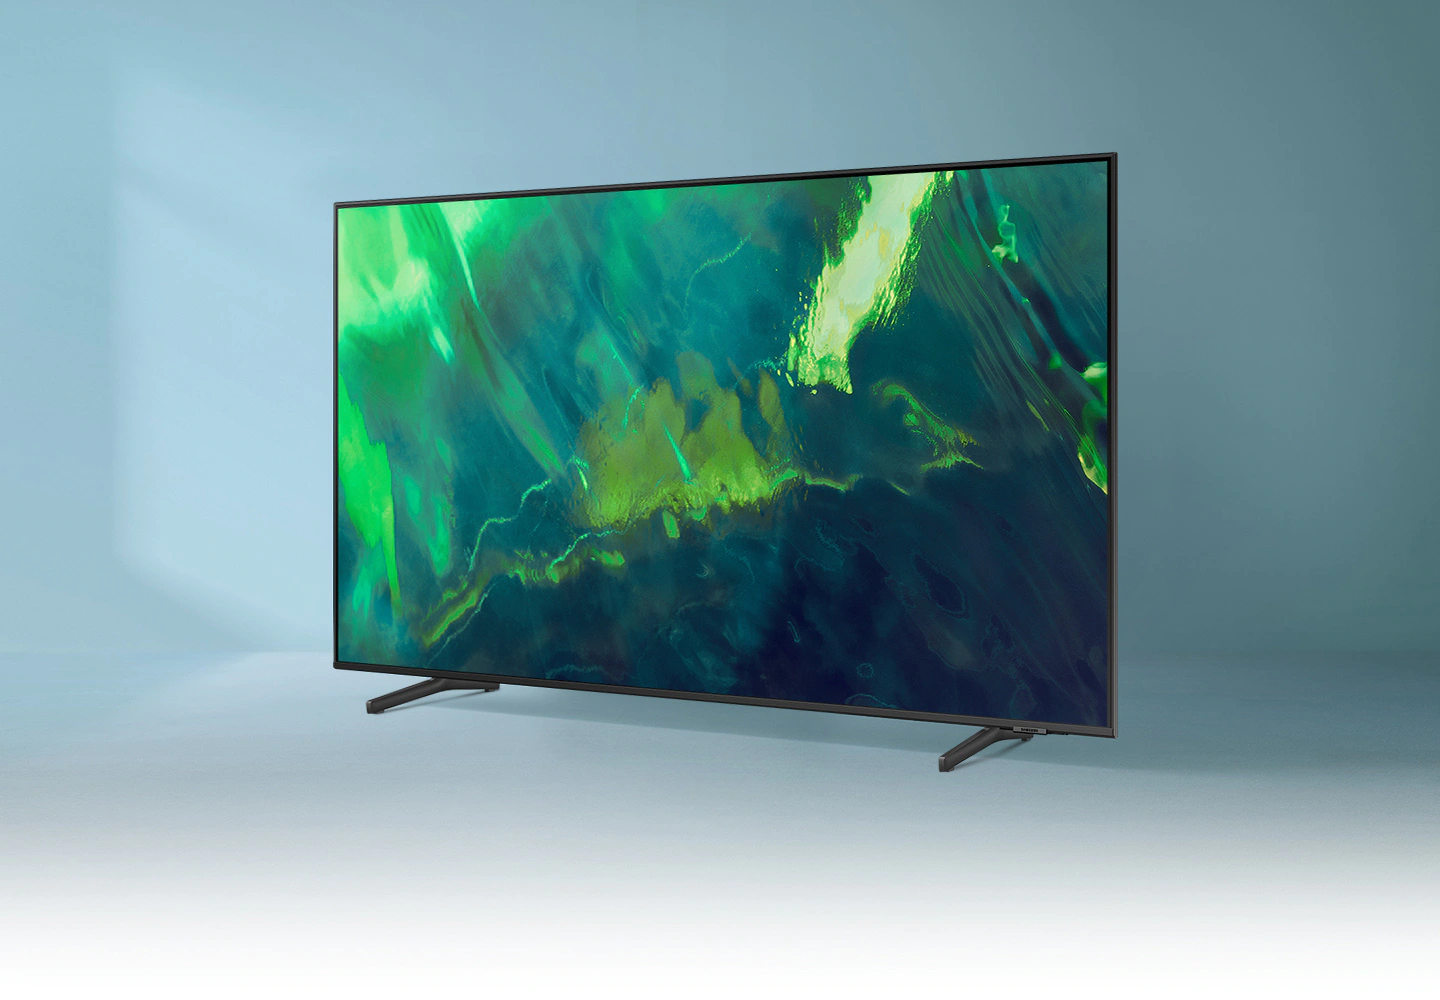 Samsung QX2: Launch of a trio of ultra-thin QLED TVs with 120 Hz refresh rates and fast response times